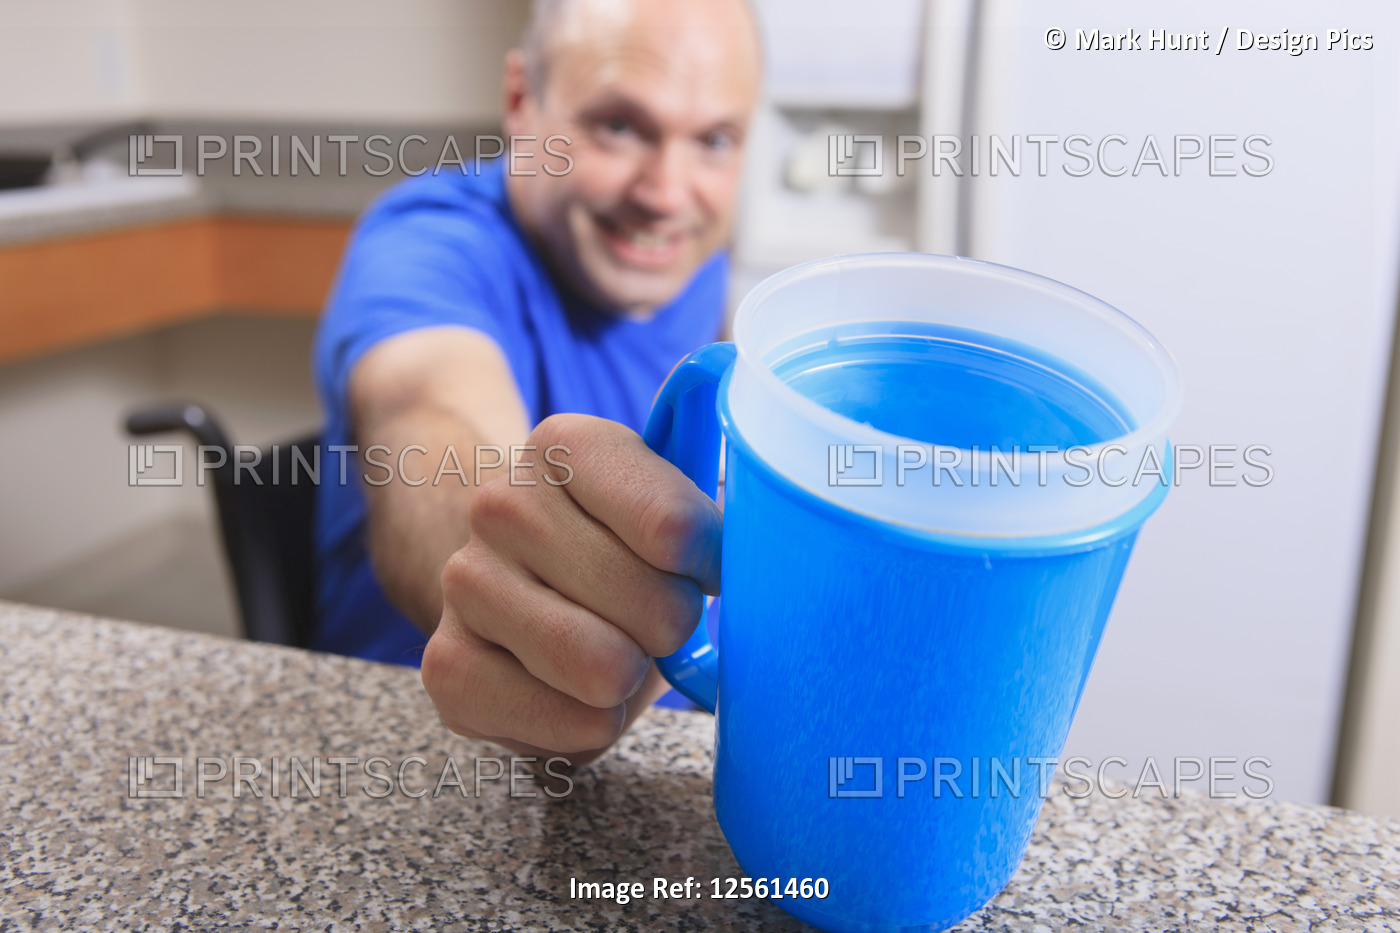 Man with Friedreich's Ataxia holding a cup of water with his deformed hands